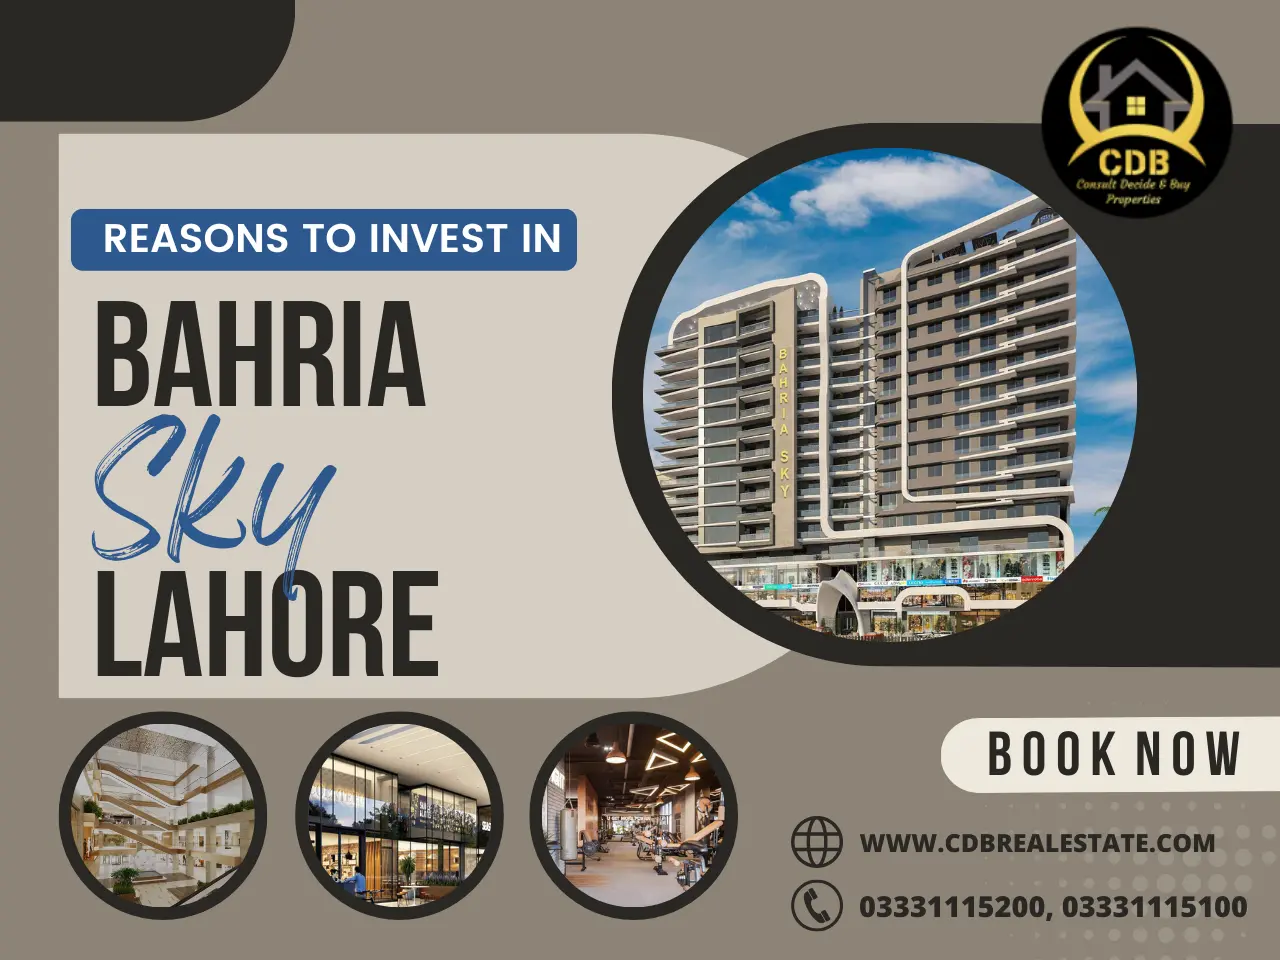 Reasons to Invest in Bahria Sky Lahore